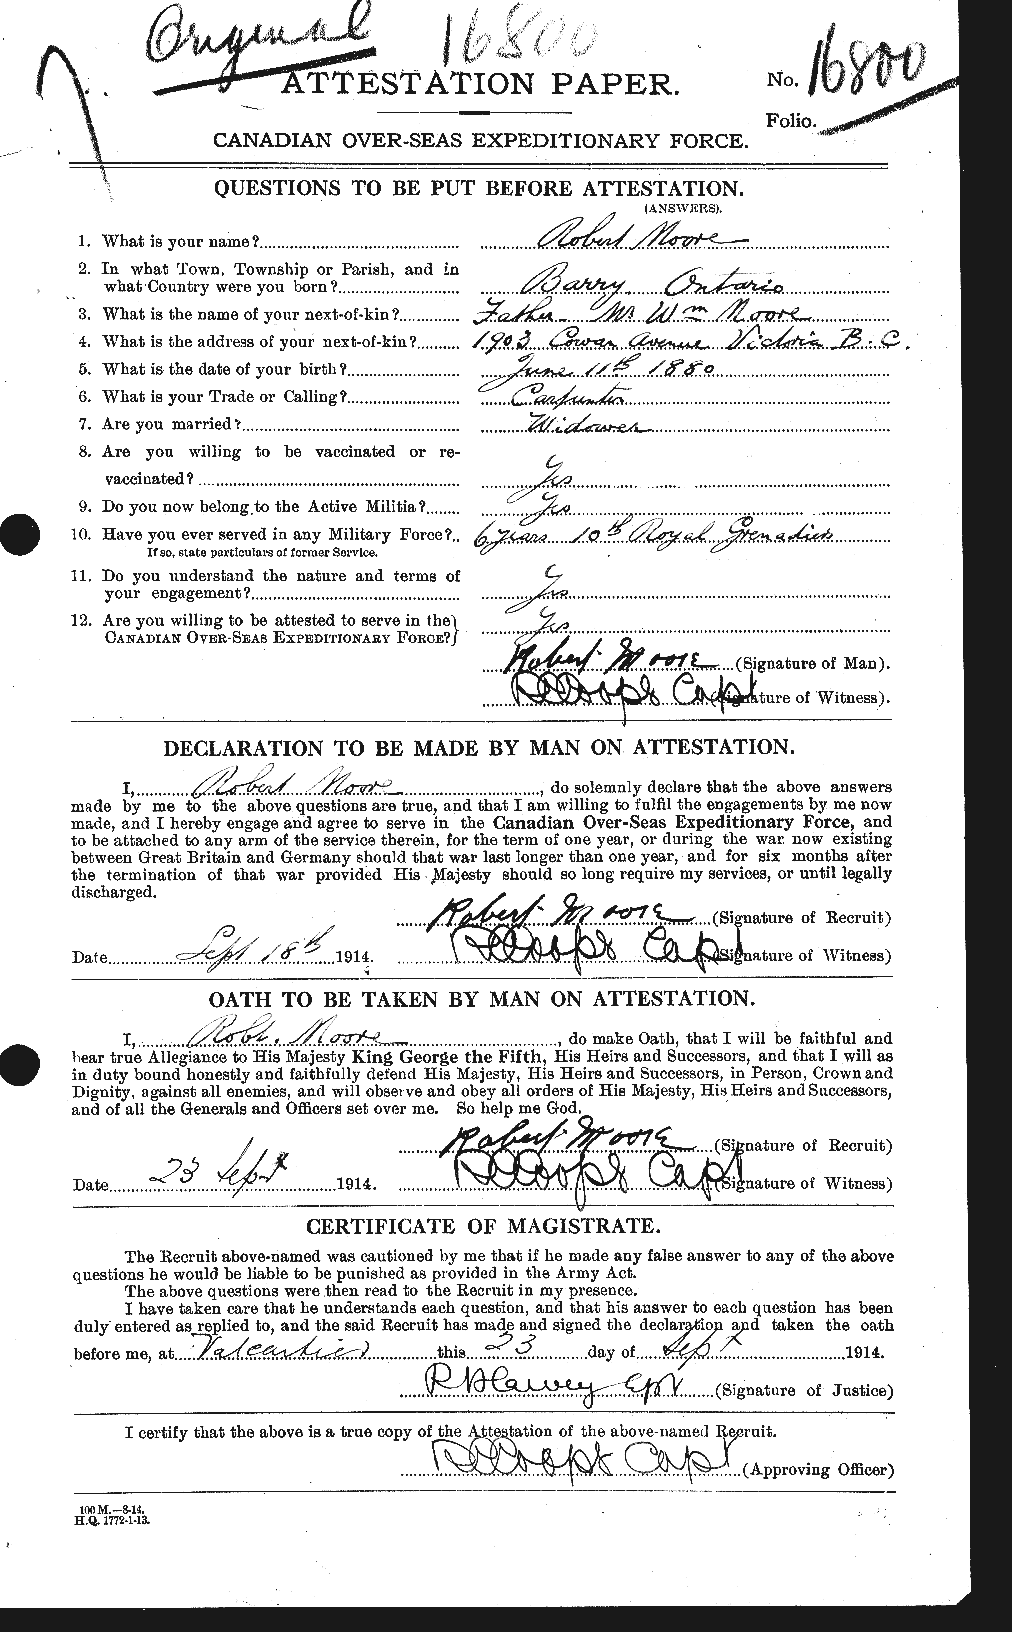 Personnel Records of the First World War - CEF 503554a